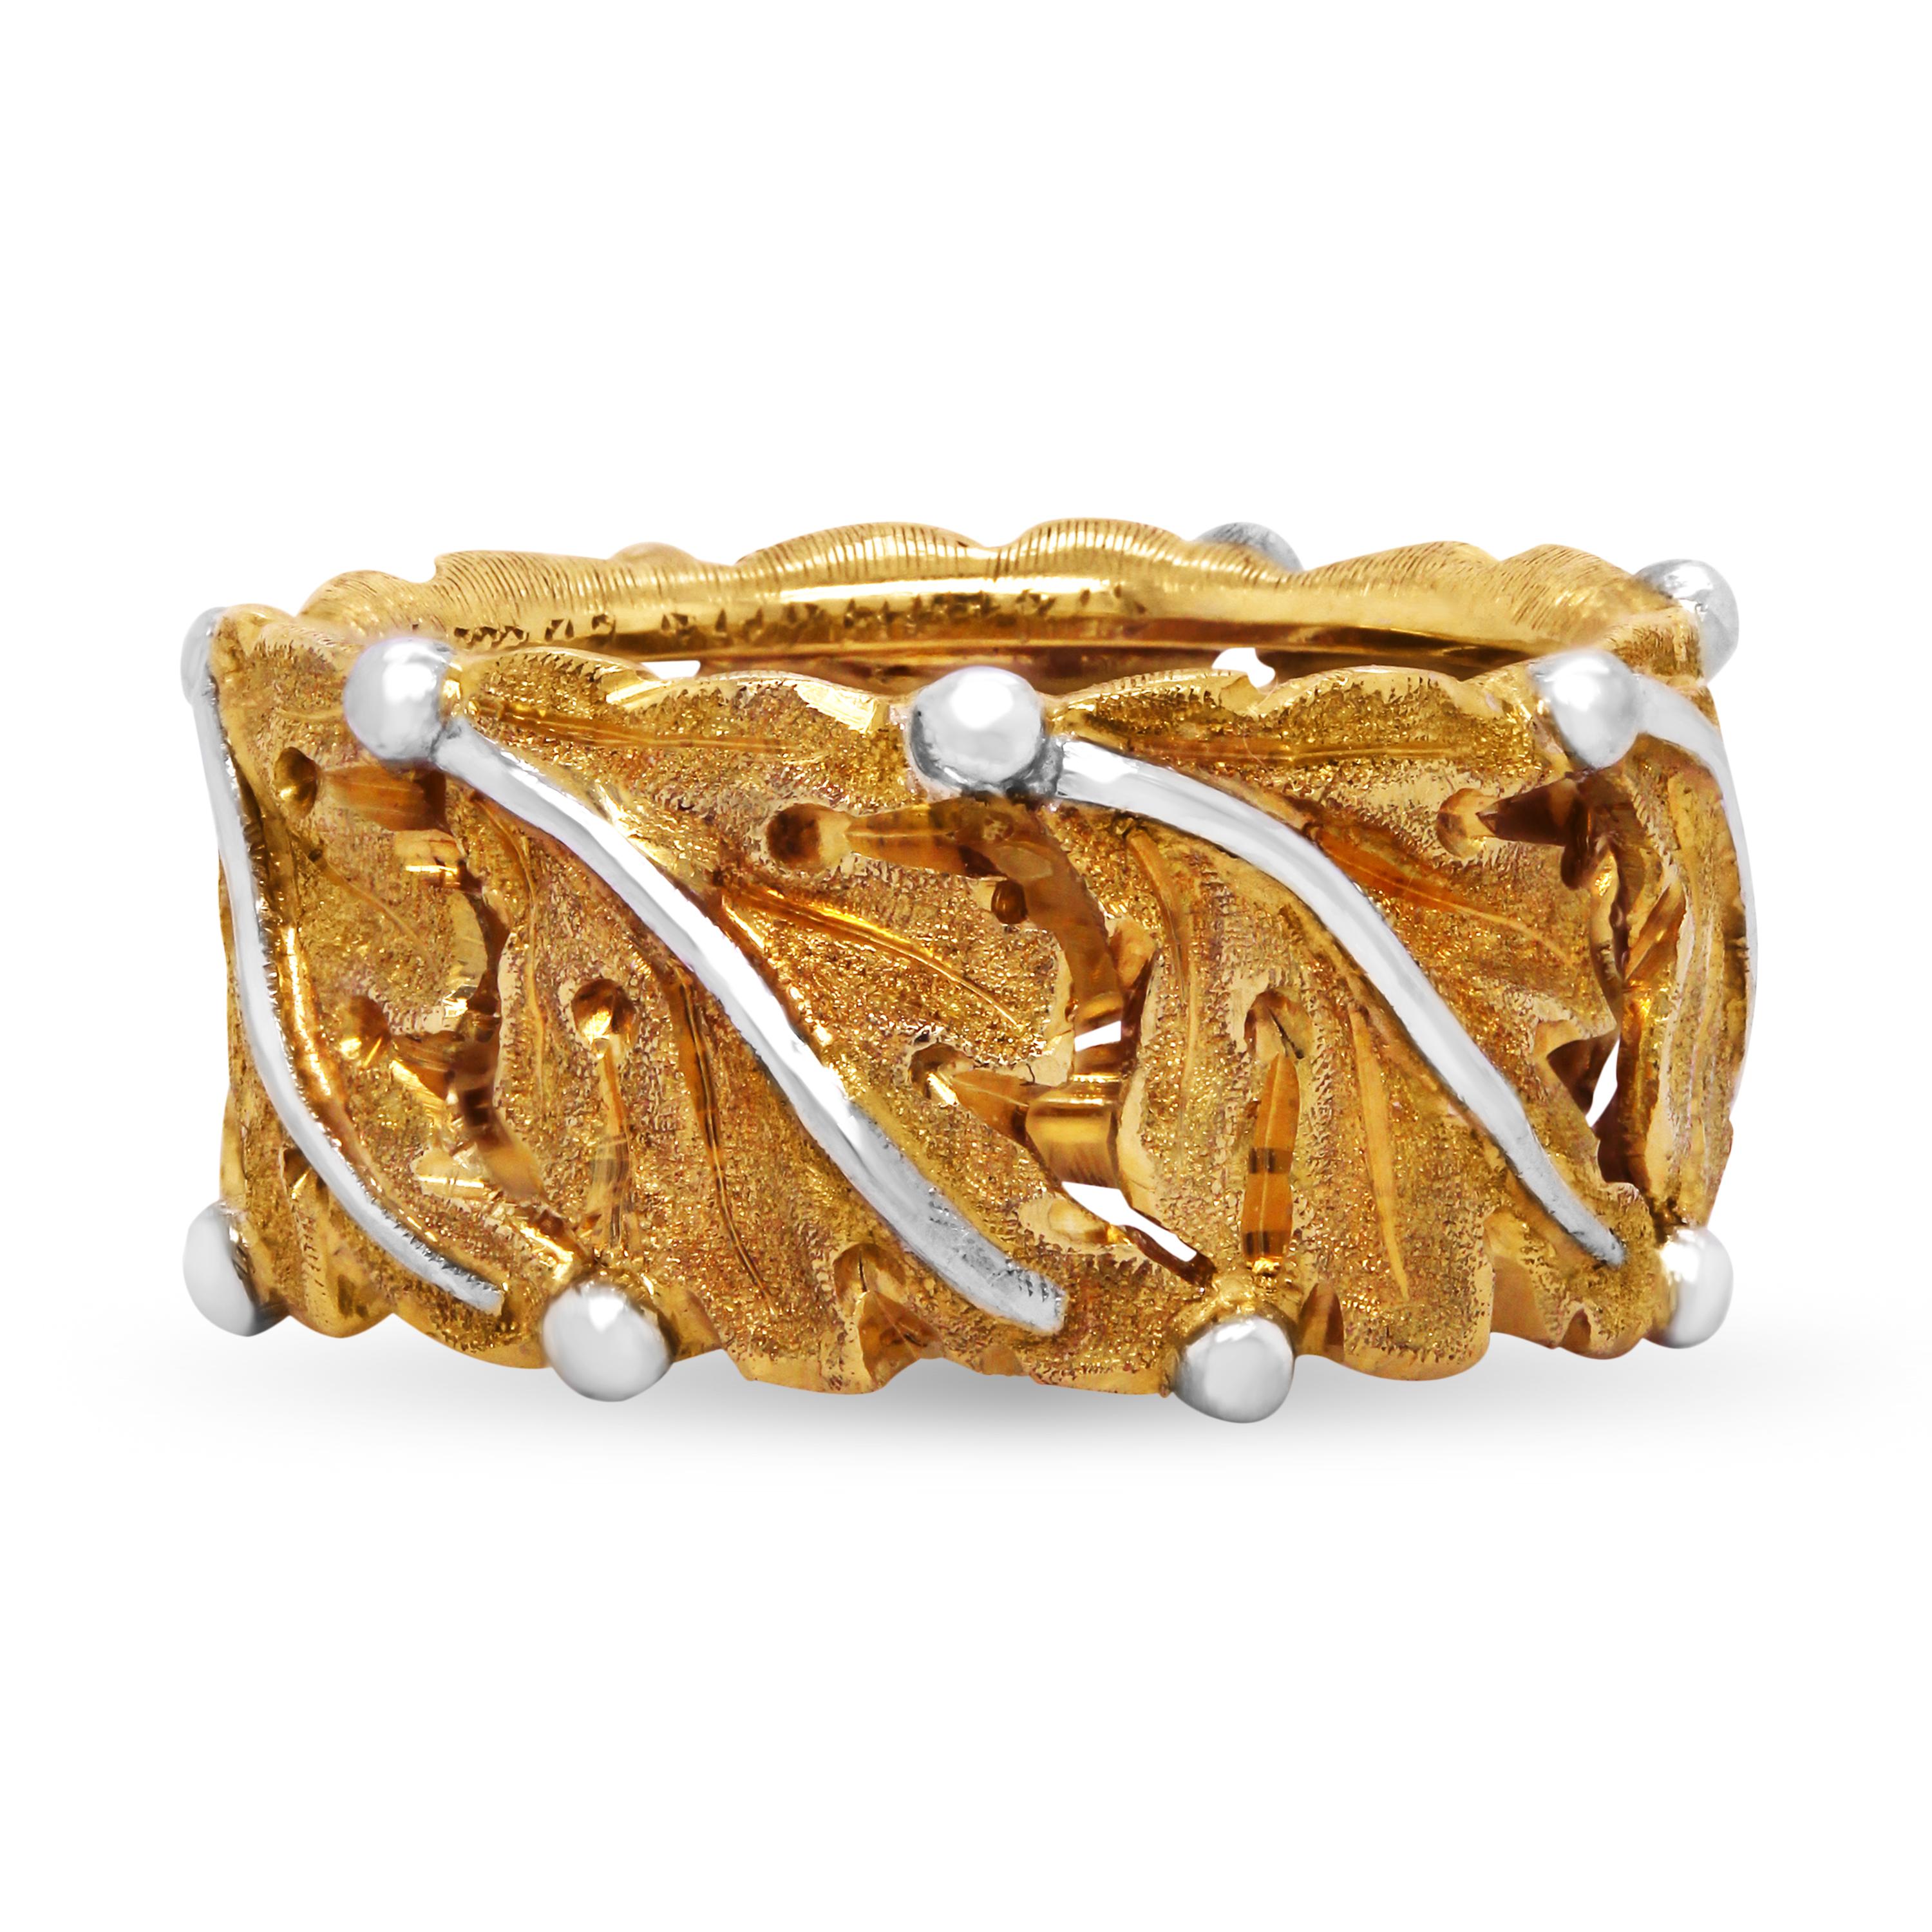 Buccellati 18 Karat Yellow White Gold Leaf Band Ring

Authentic Buccellati, handmade band ring with leaves all around. 

Band is 8.3mm in width. Size 5.

Signed Buccellati